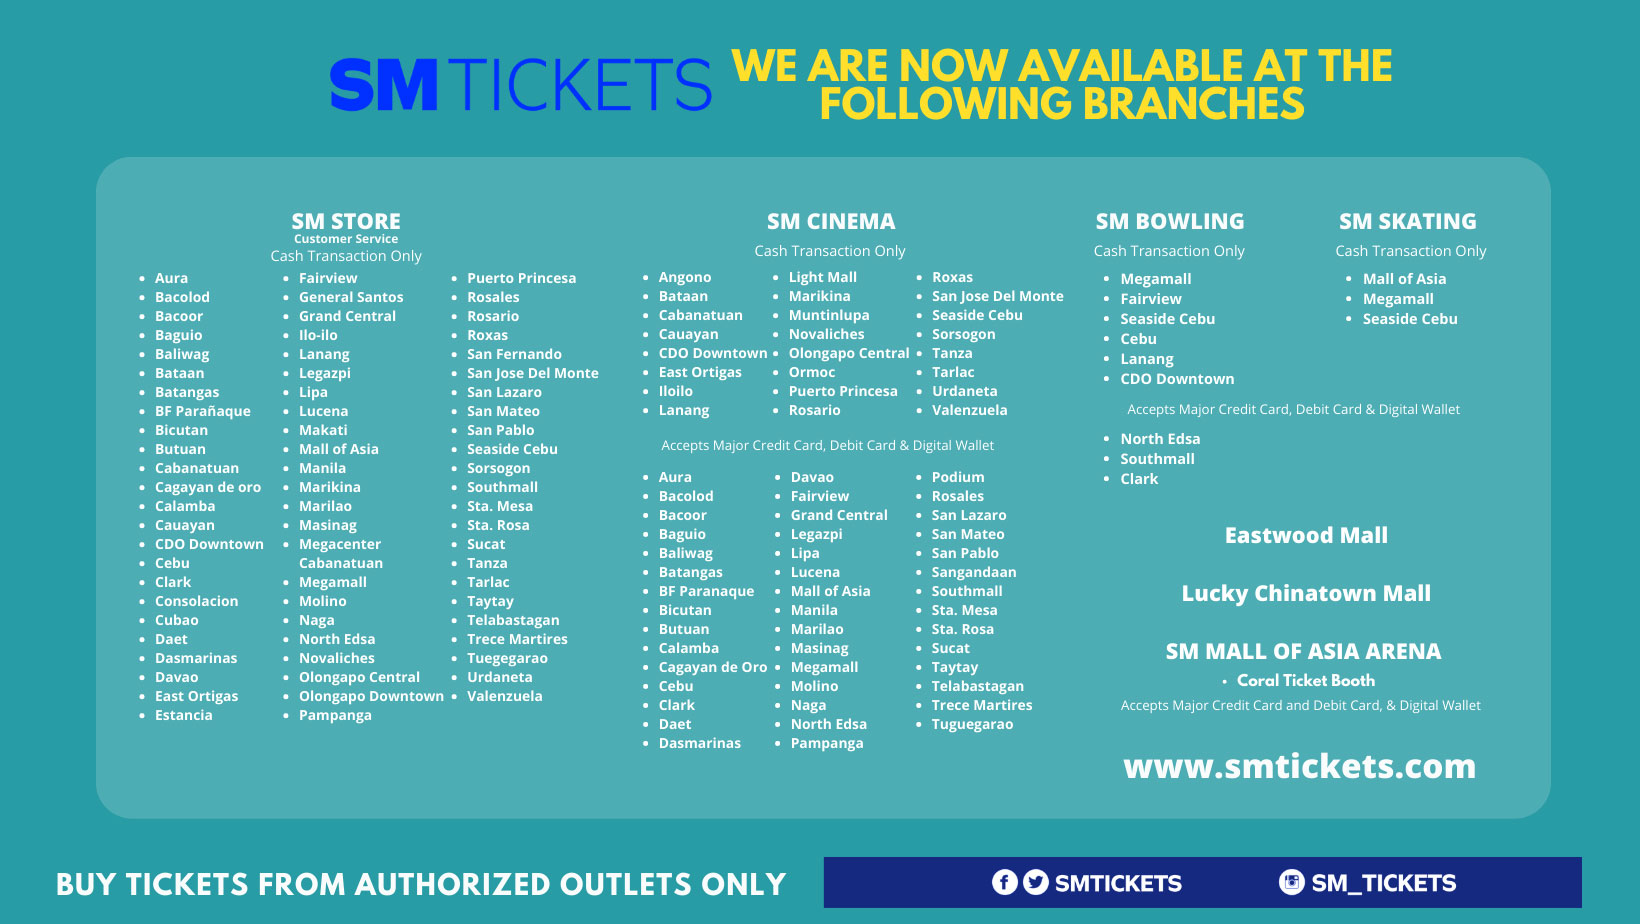 SM Tickets outlets and locations